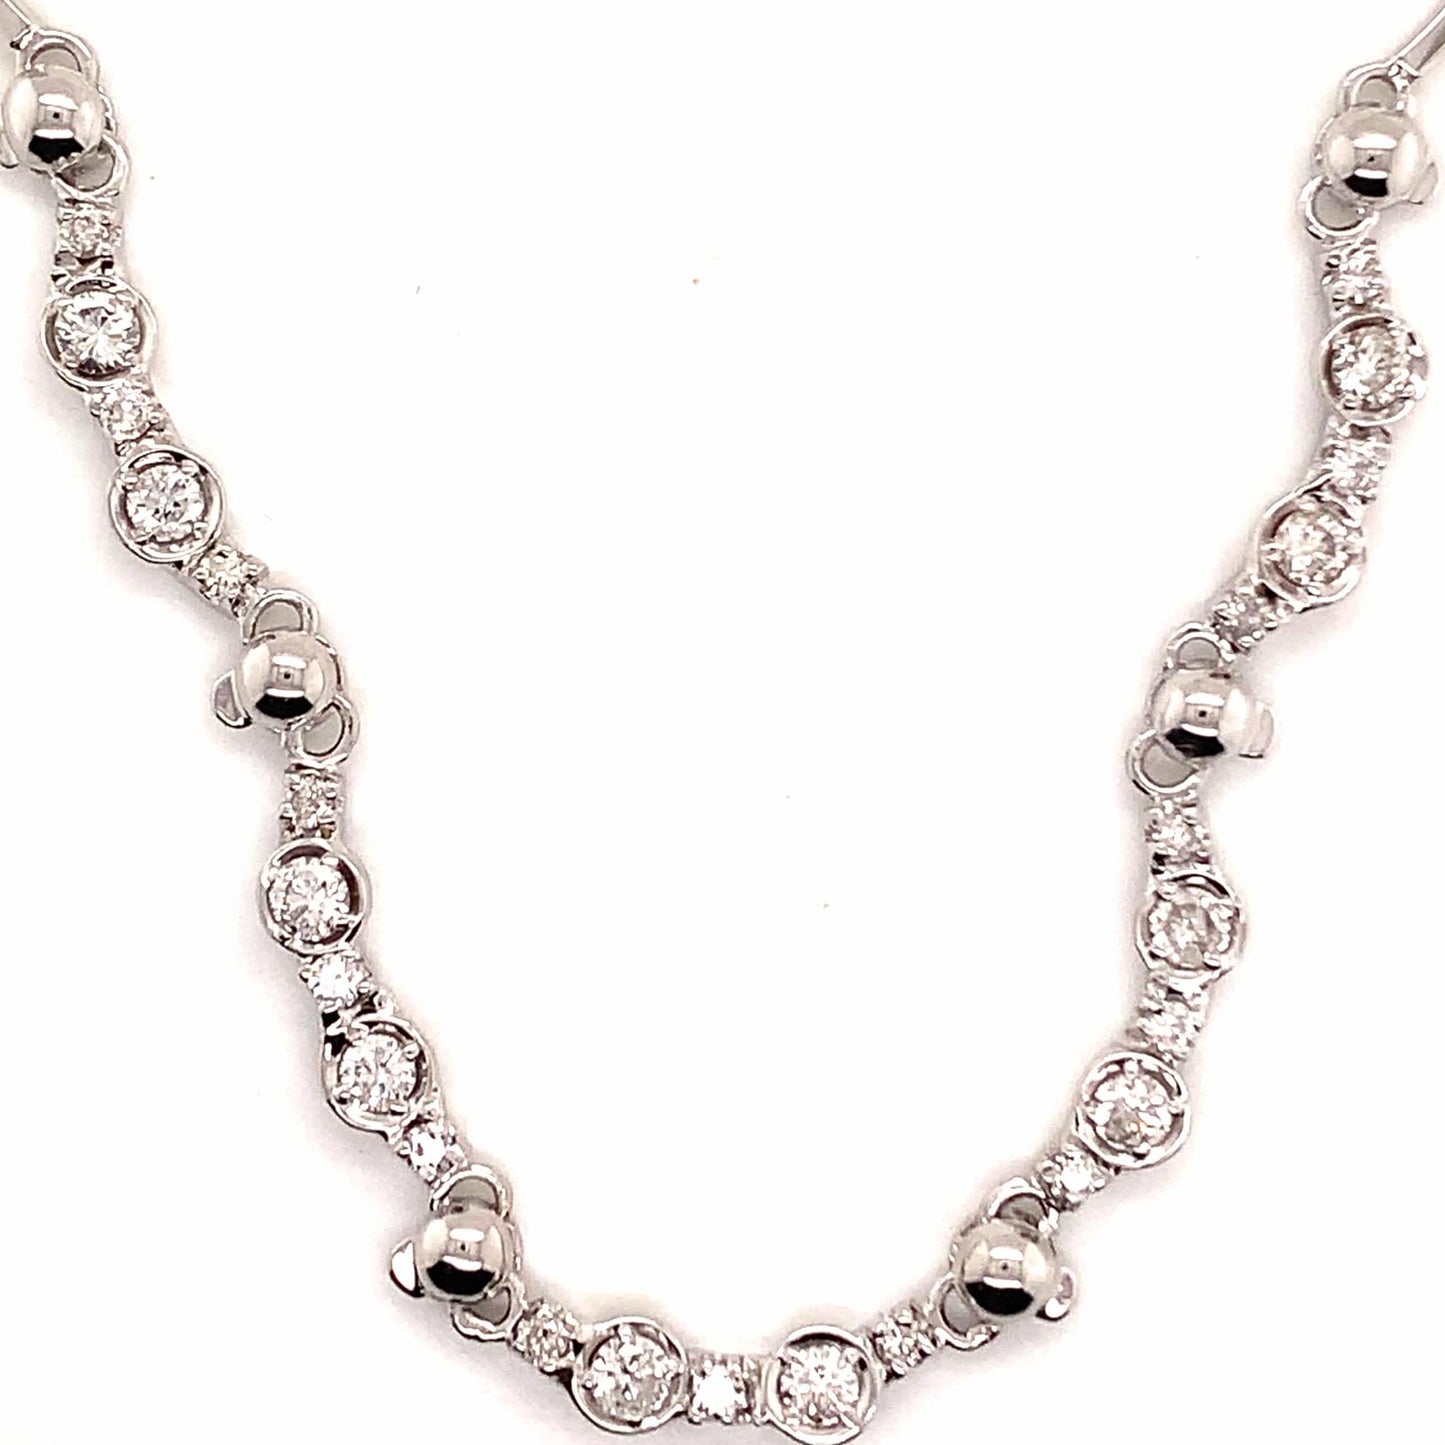 Diamond 14k Gold Necklace 1.5 CT 16.50 inch Certified $4,950 822590 - Certified Estate Jewelry